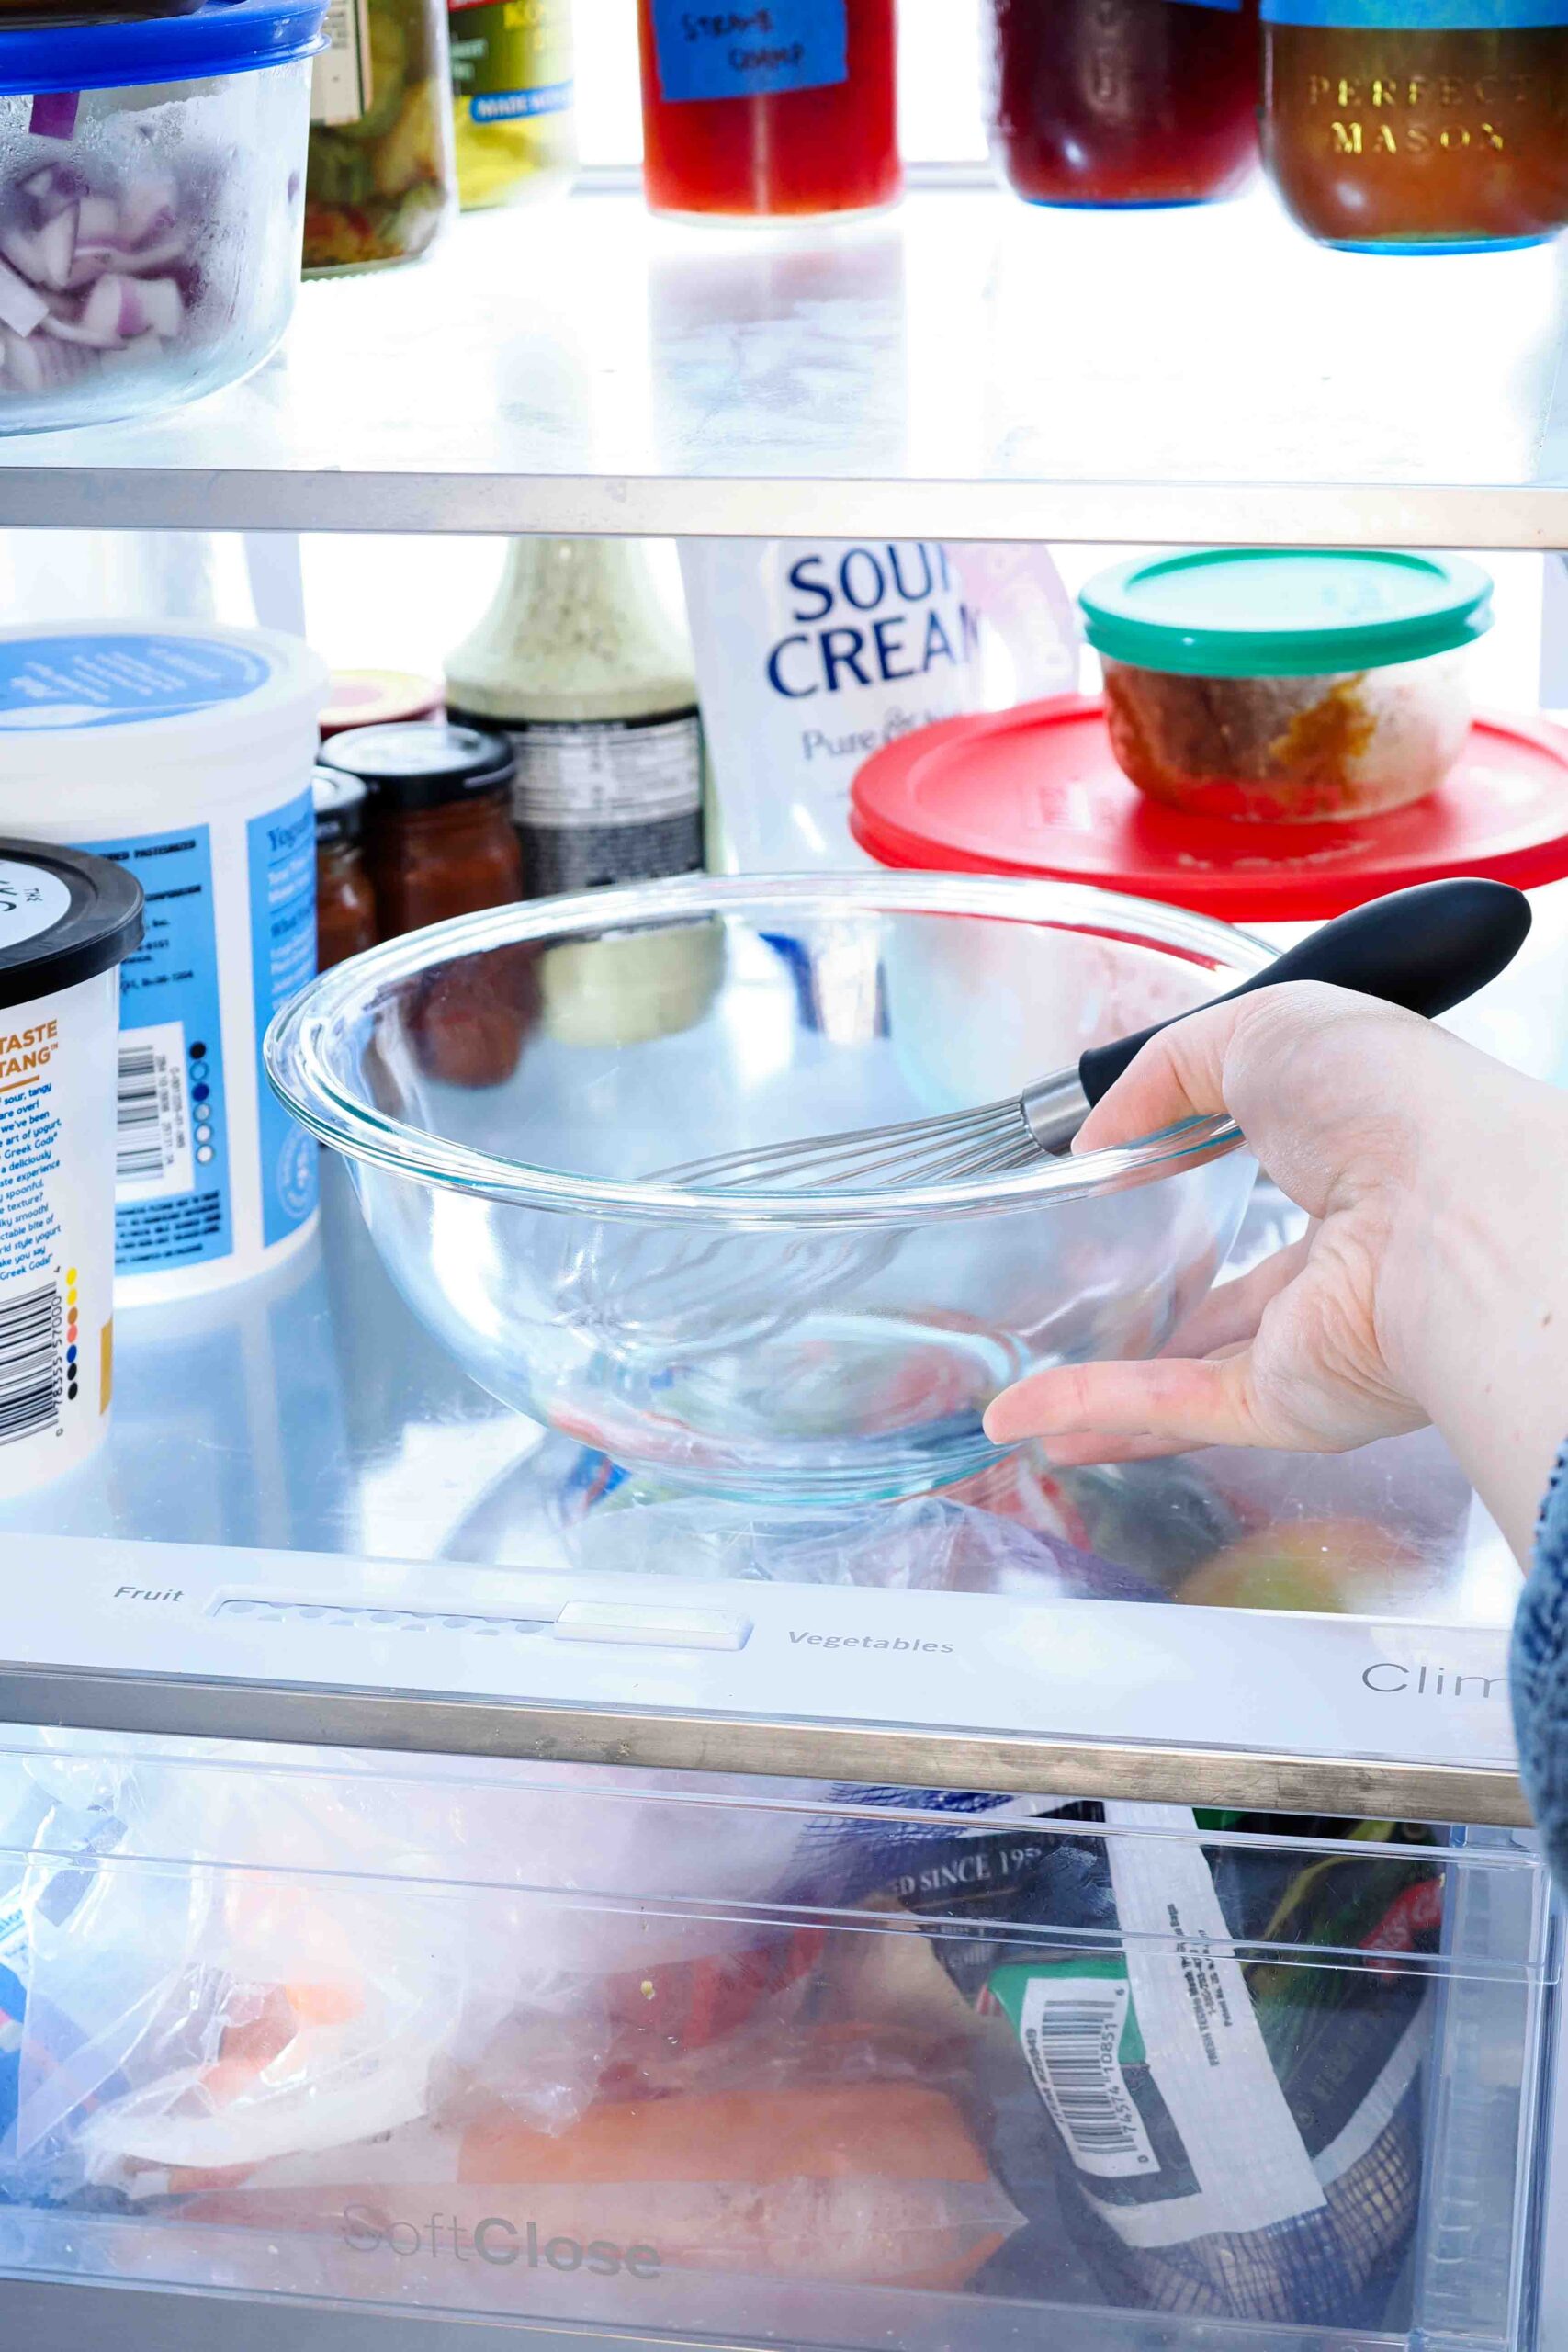 A hand places a medium glass bowl and whisk in the fridge.